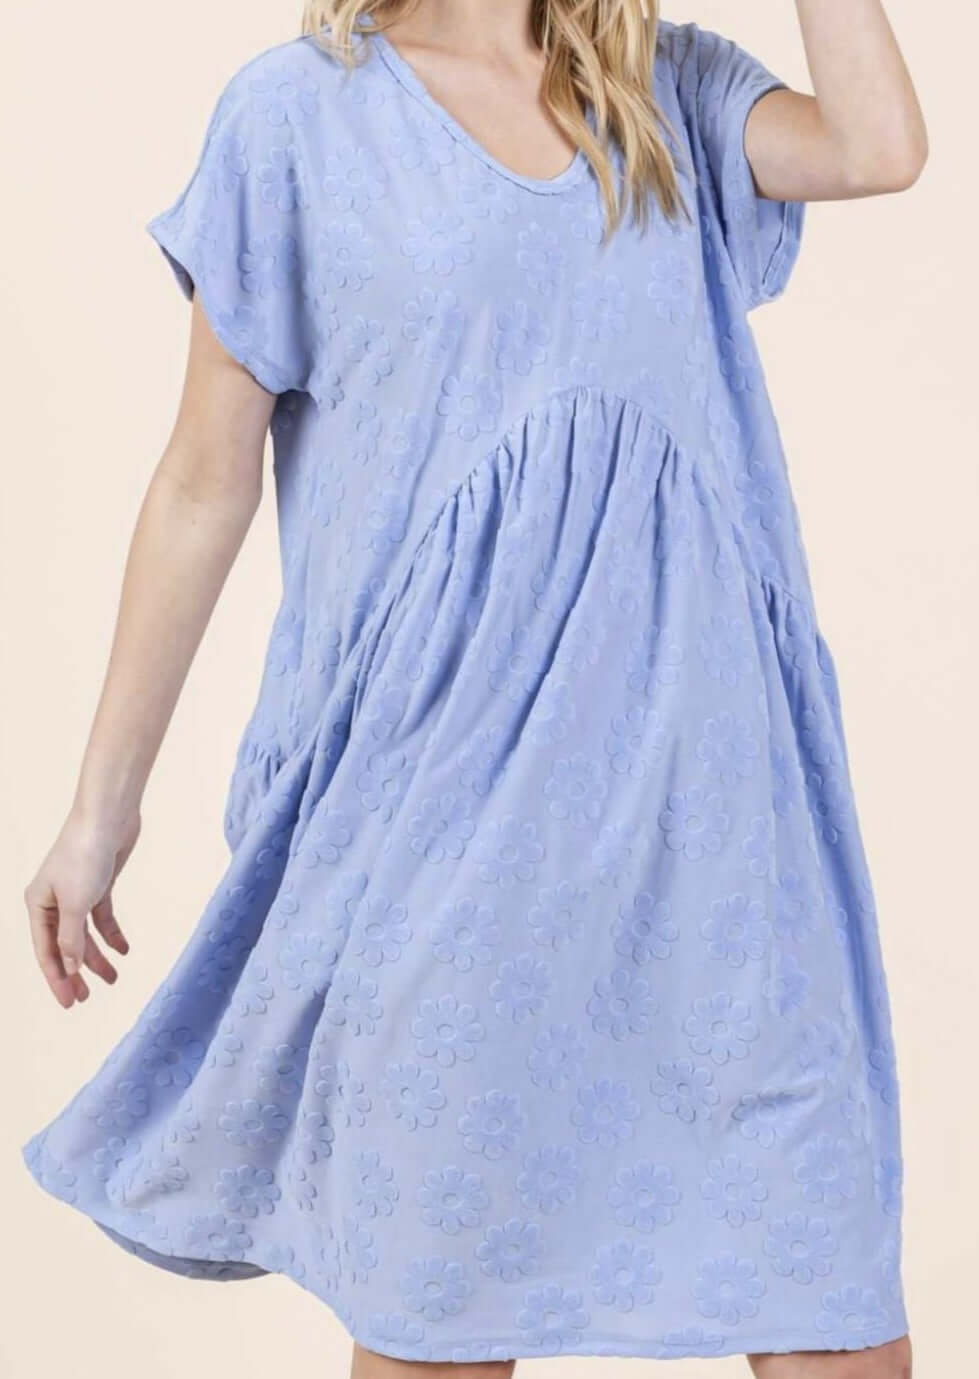 Made in USA Soft Textured Daisy Detail Dress, Above the Knee Length, Short Sleeves, Round Neckline, Soft Stretchy Material, Blue with Raised Daisy Texture Detail